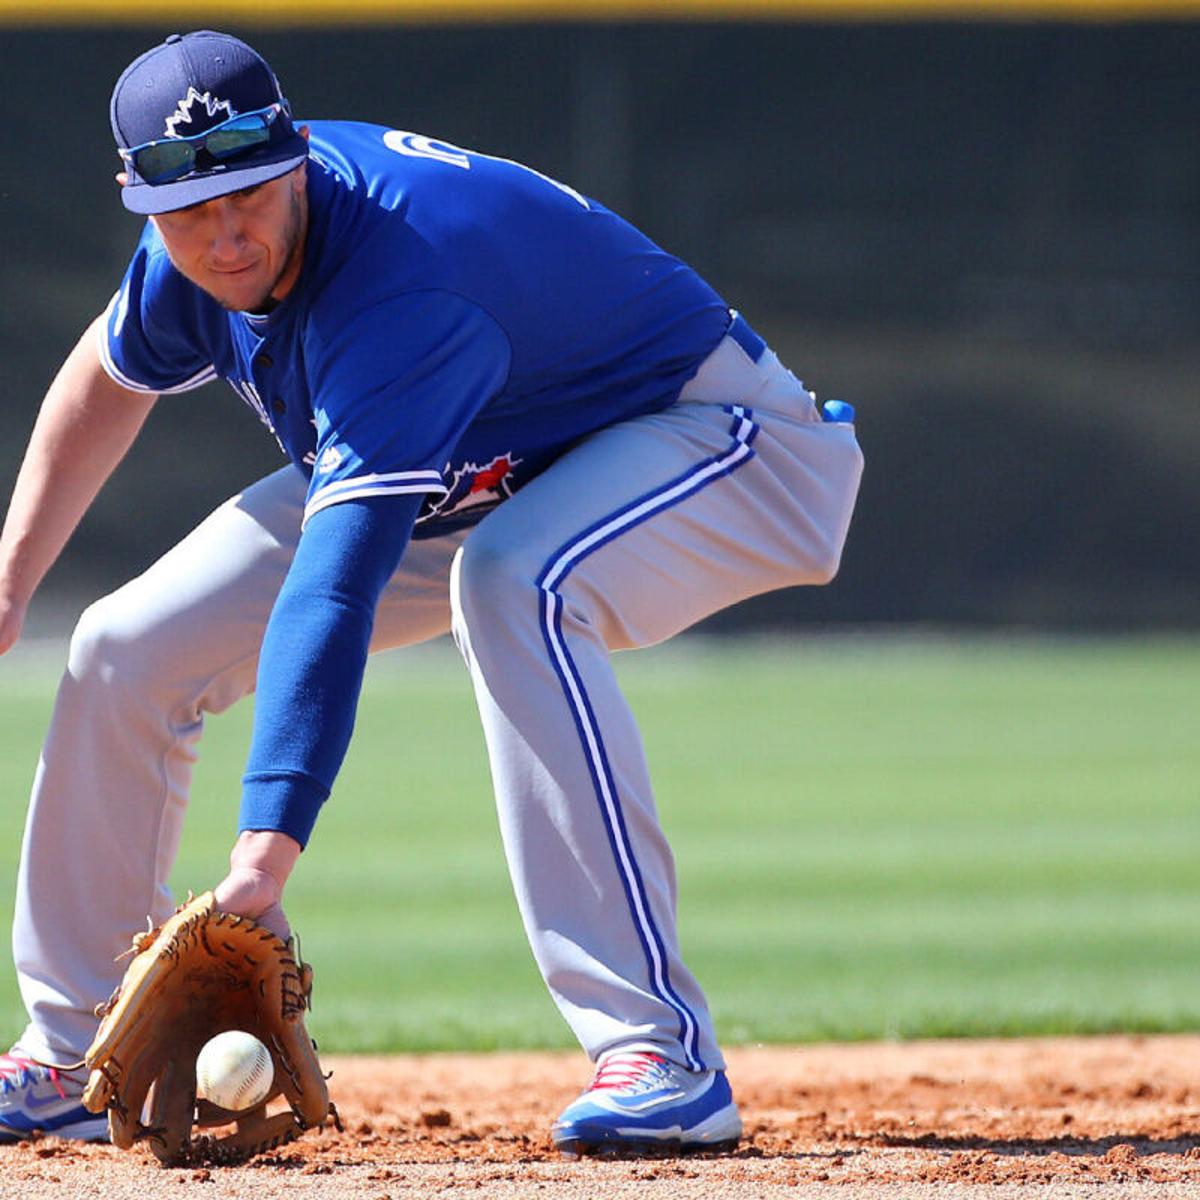 Troy Tulowitzki much more comfortable as a Blue Jay: Griffin